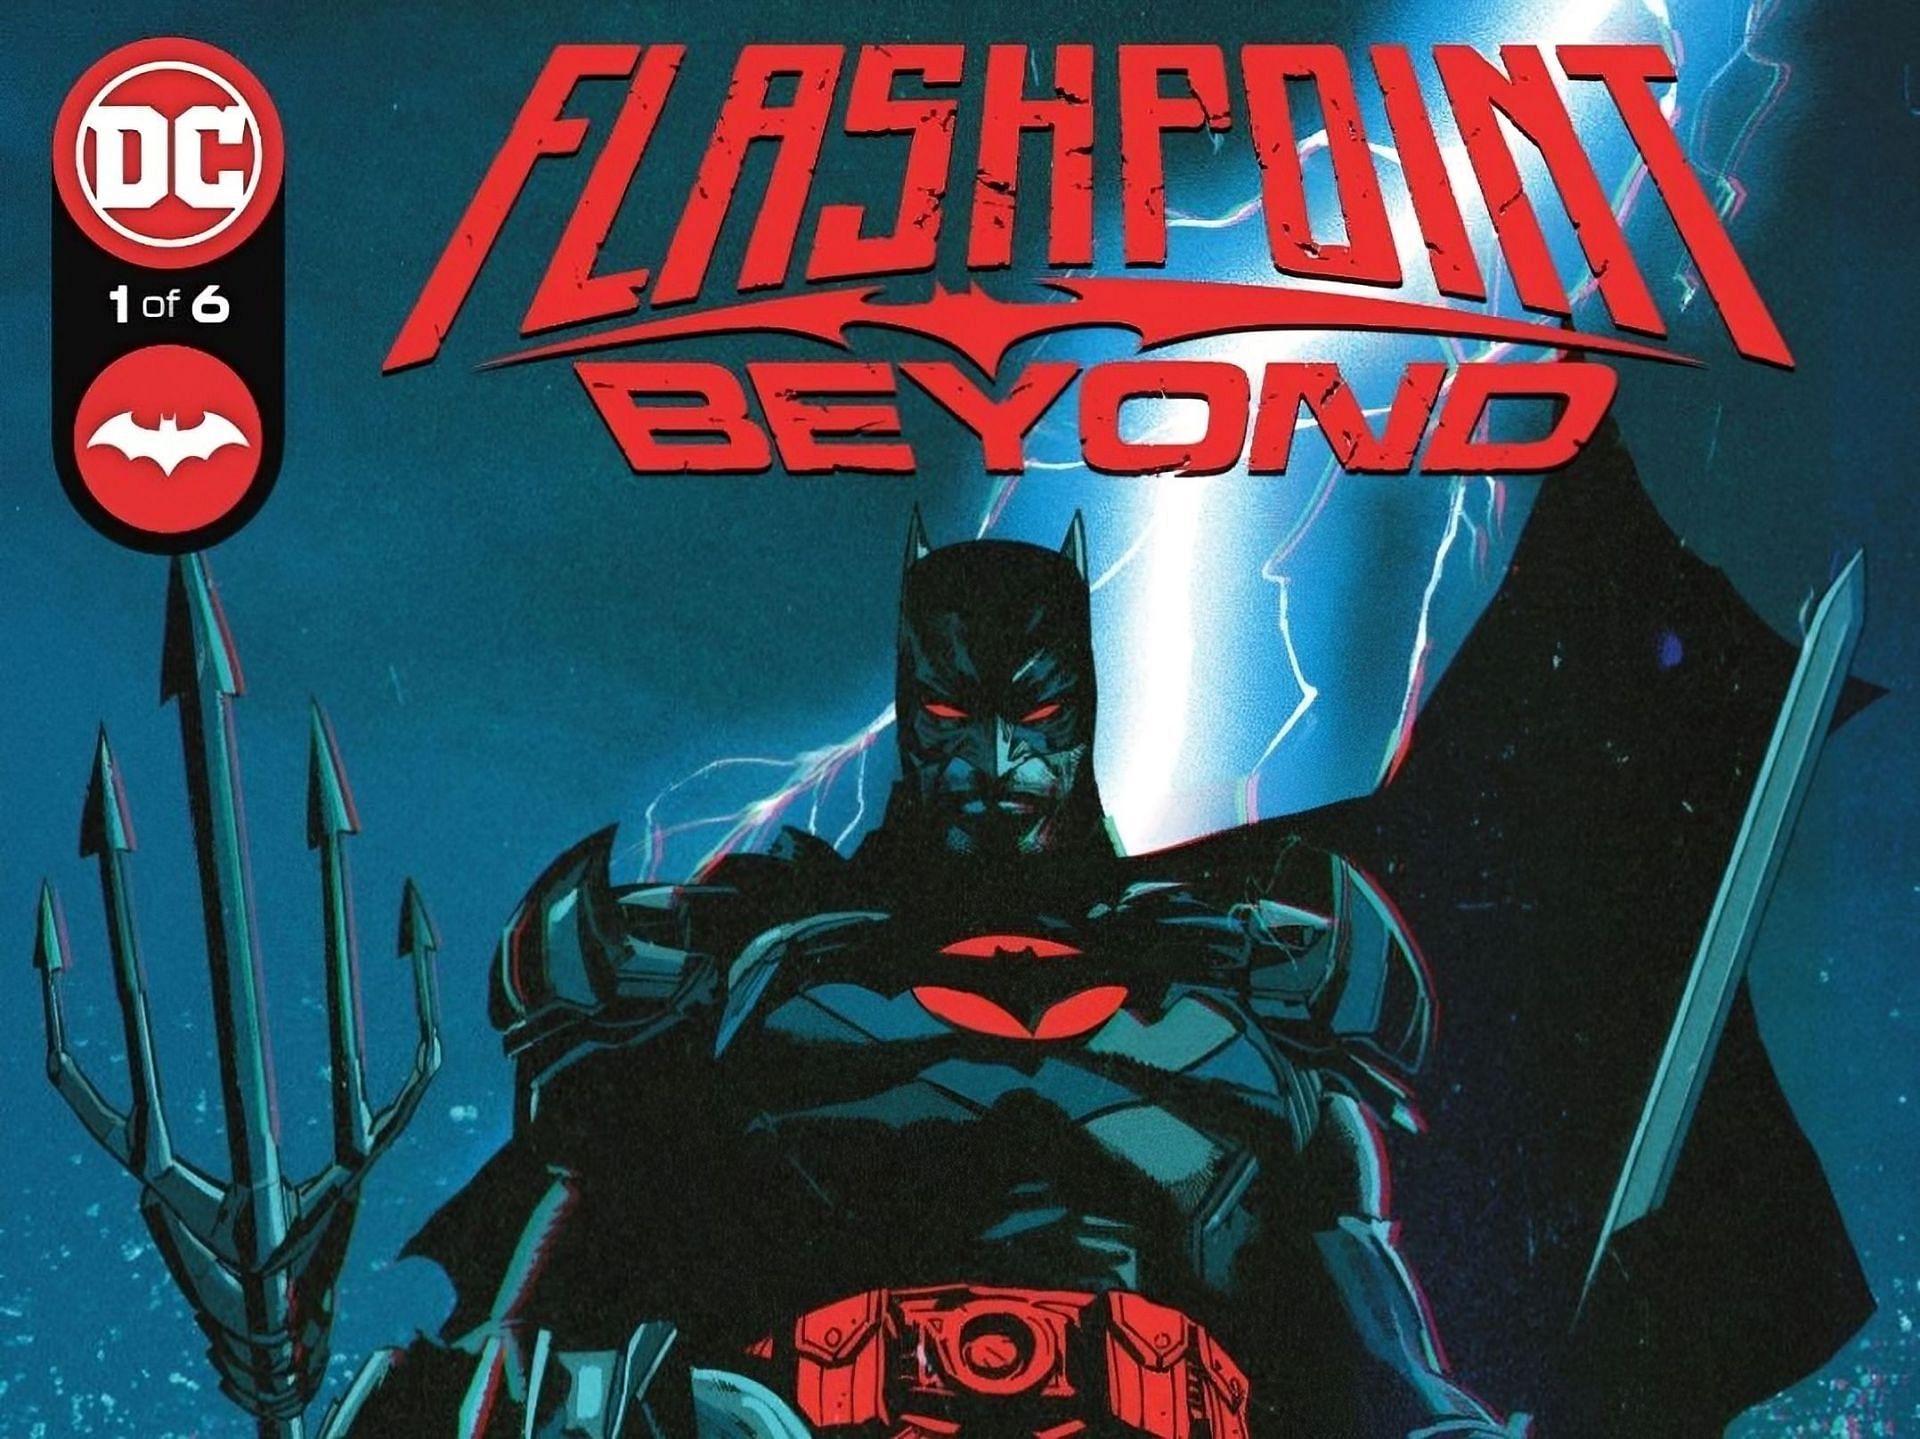 Flashpoint Beyond #1 Review: Thomas Wayne's story is quite muddled but  shows potential